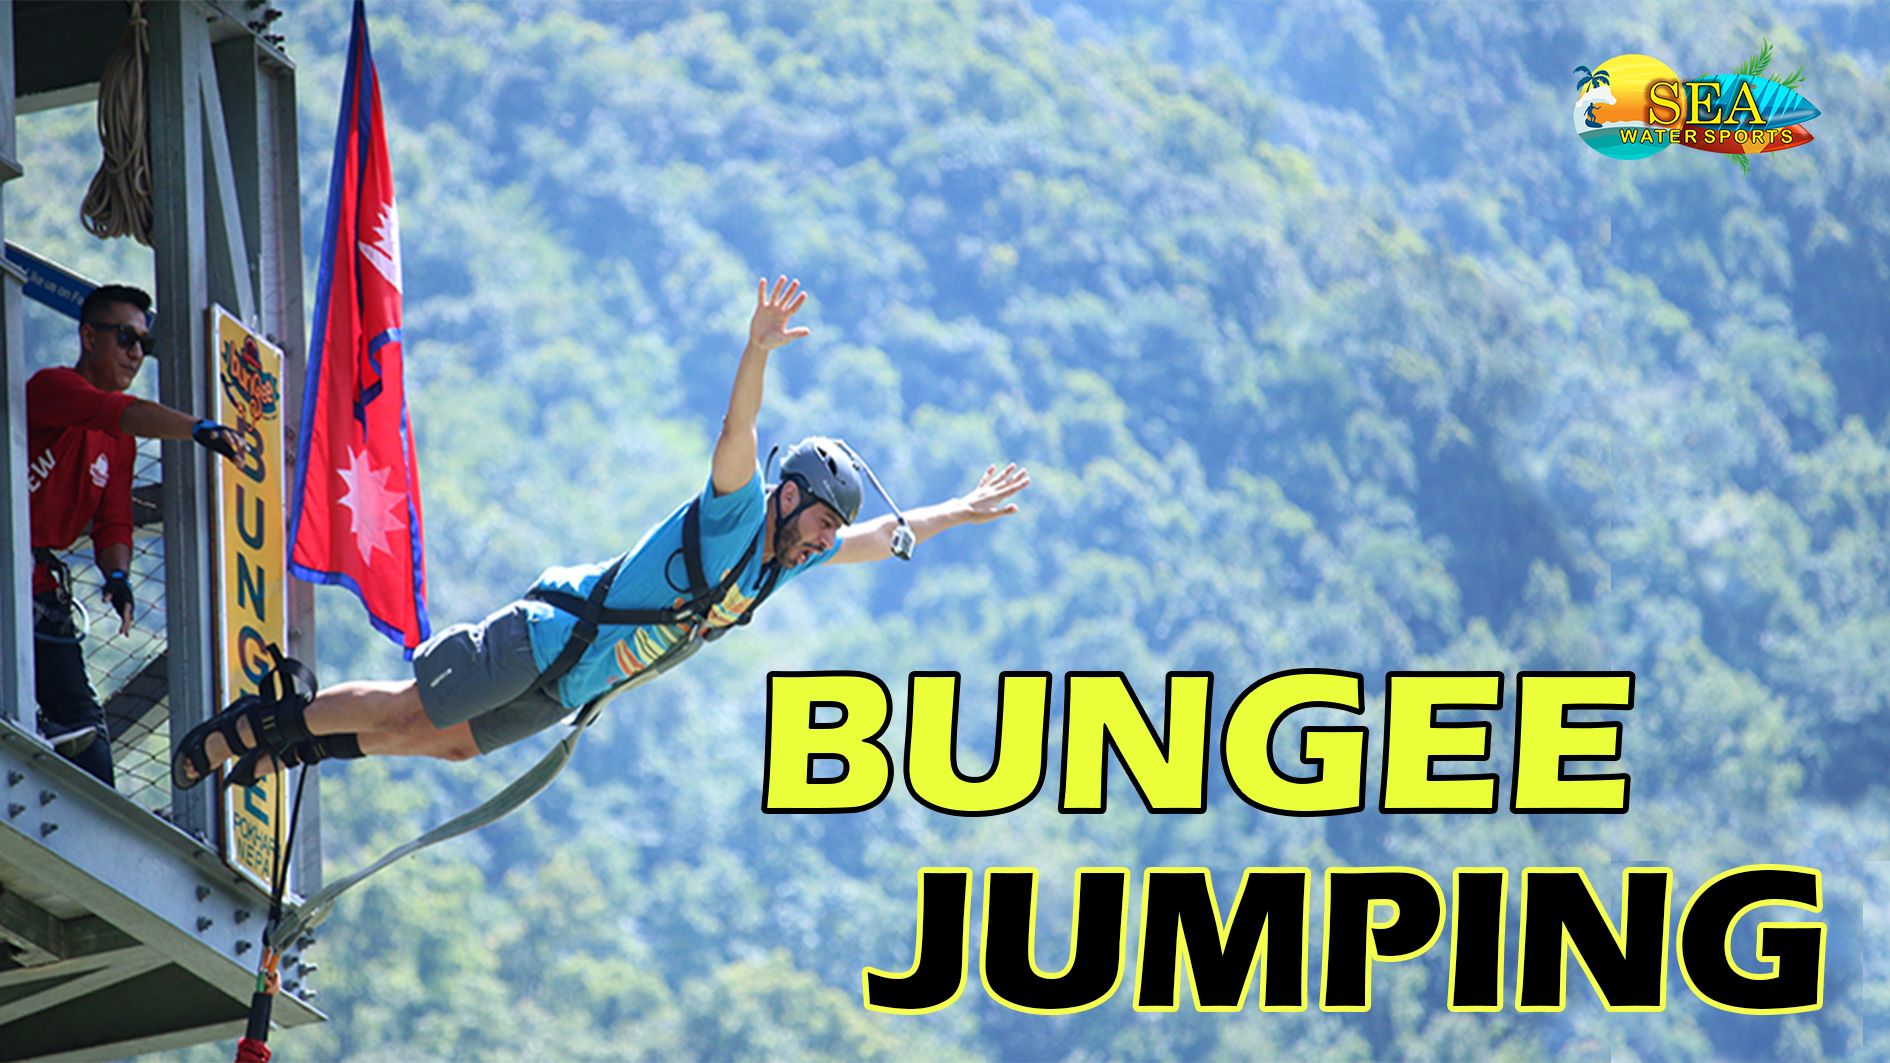 Bungee Jumping In Goa by Sea Water Sports, North Goa, Goa, India